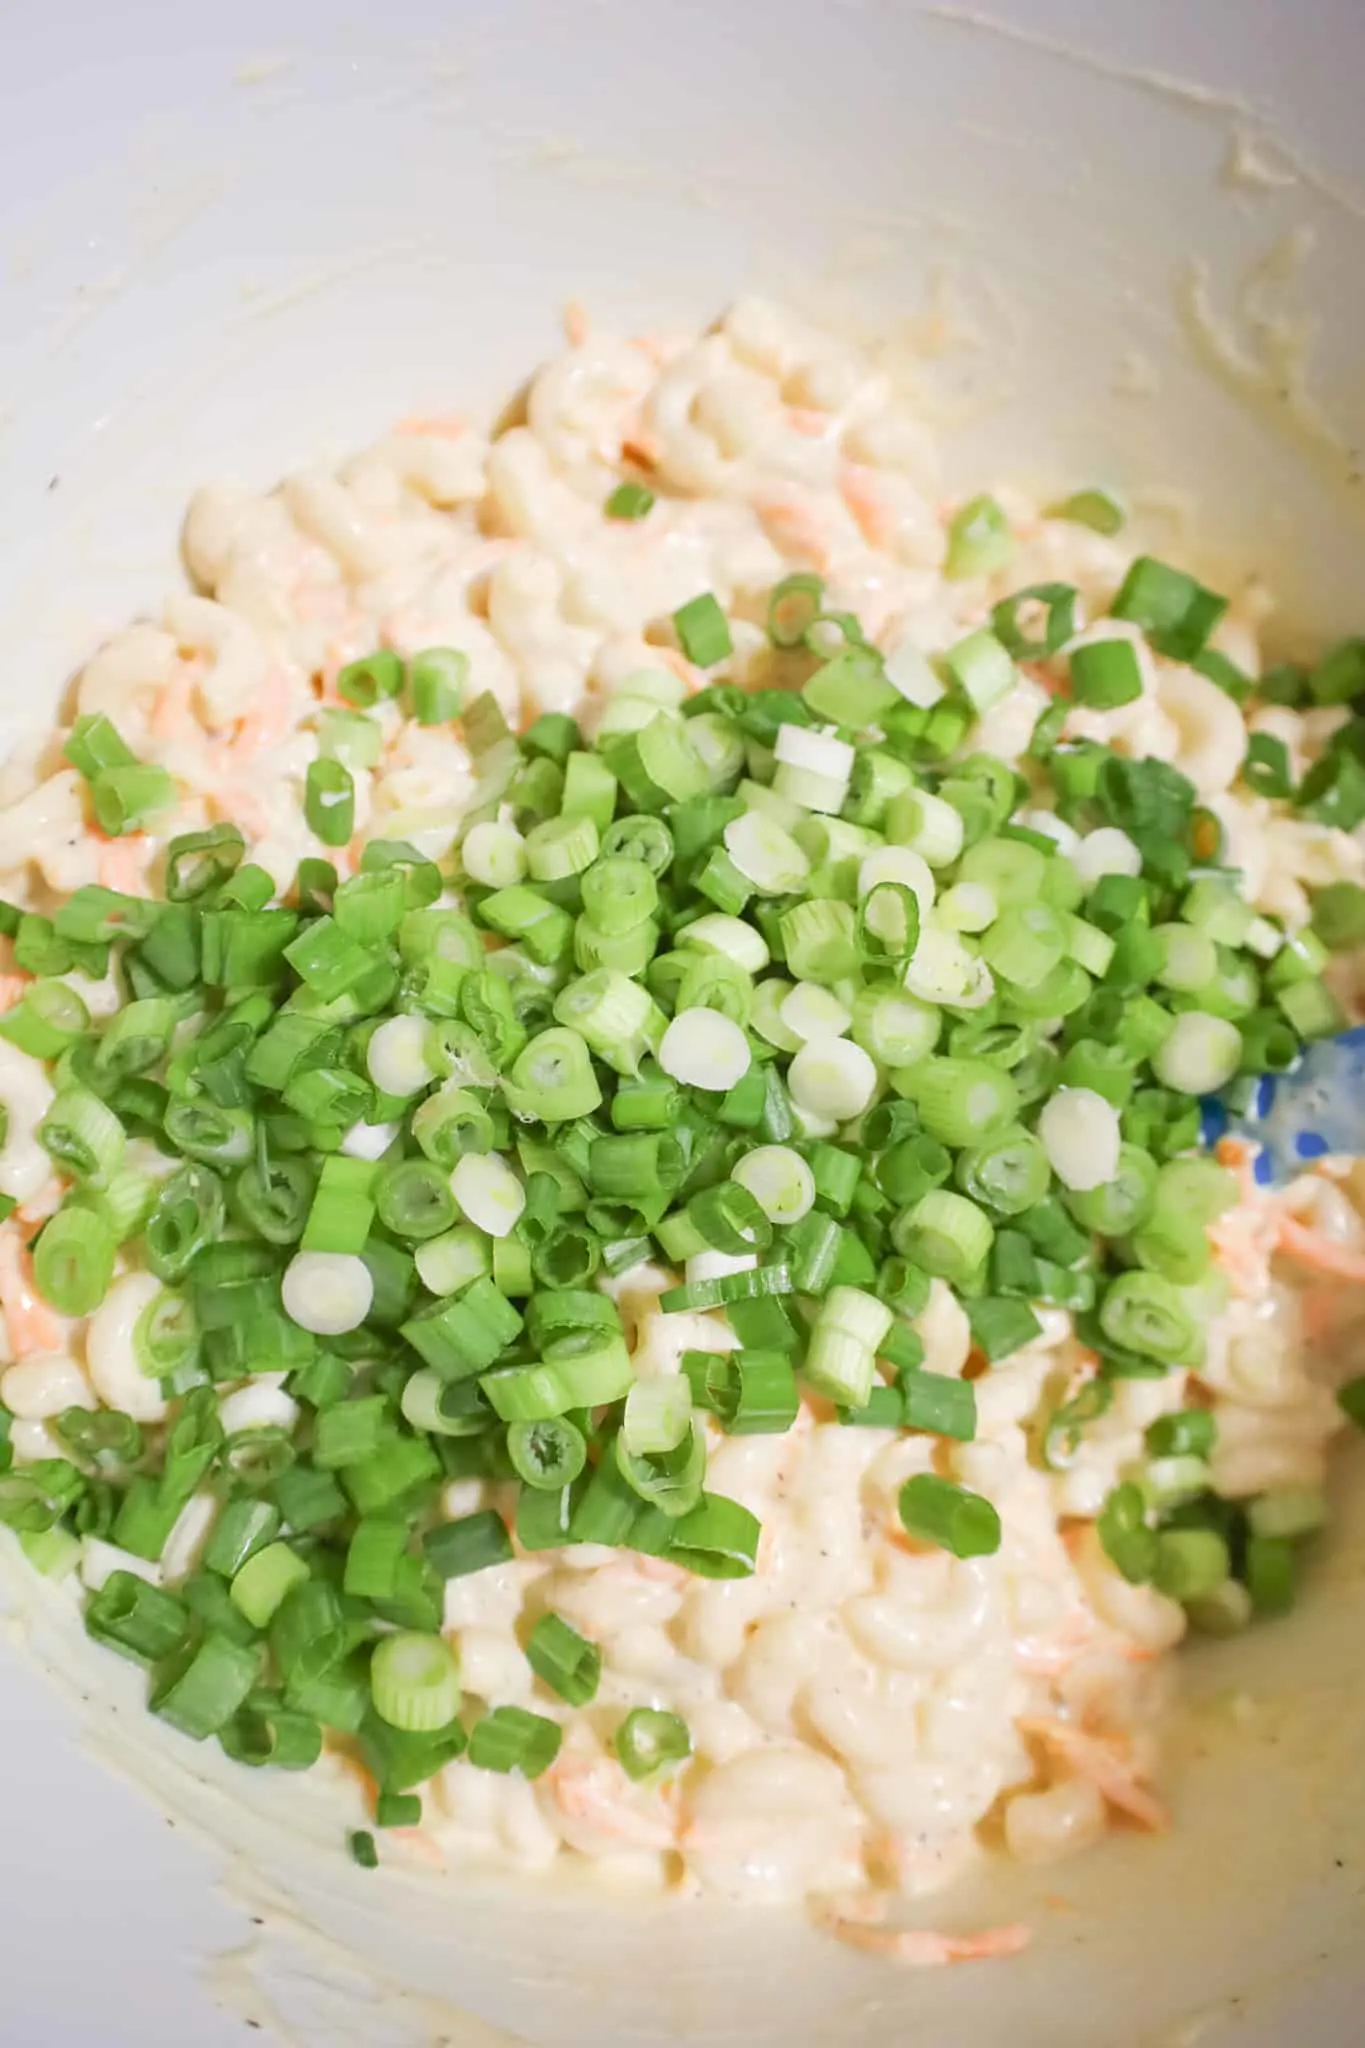 chopped green onions on top of creamy macaroni mixture in a mixing bowl